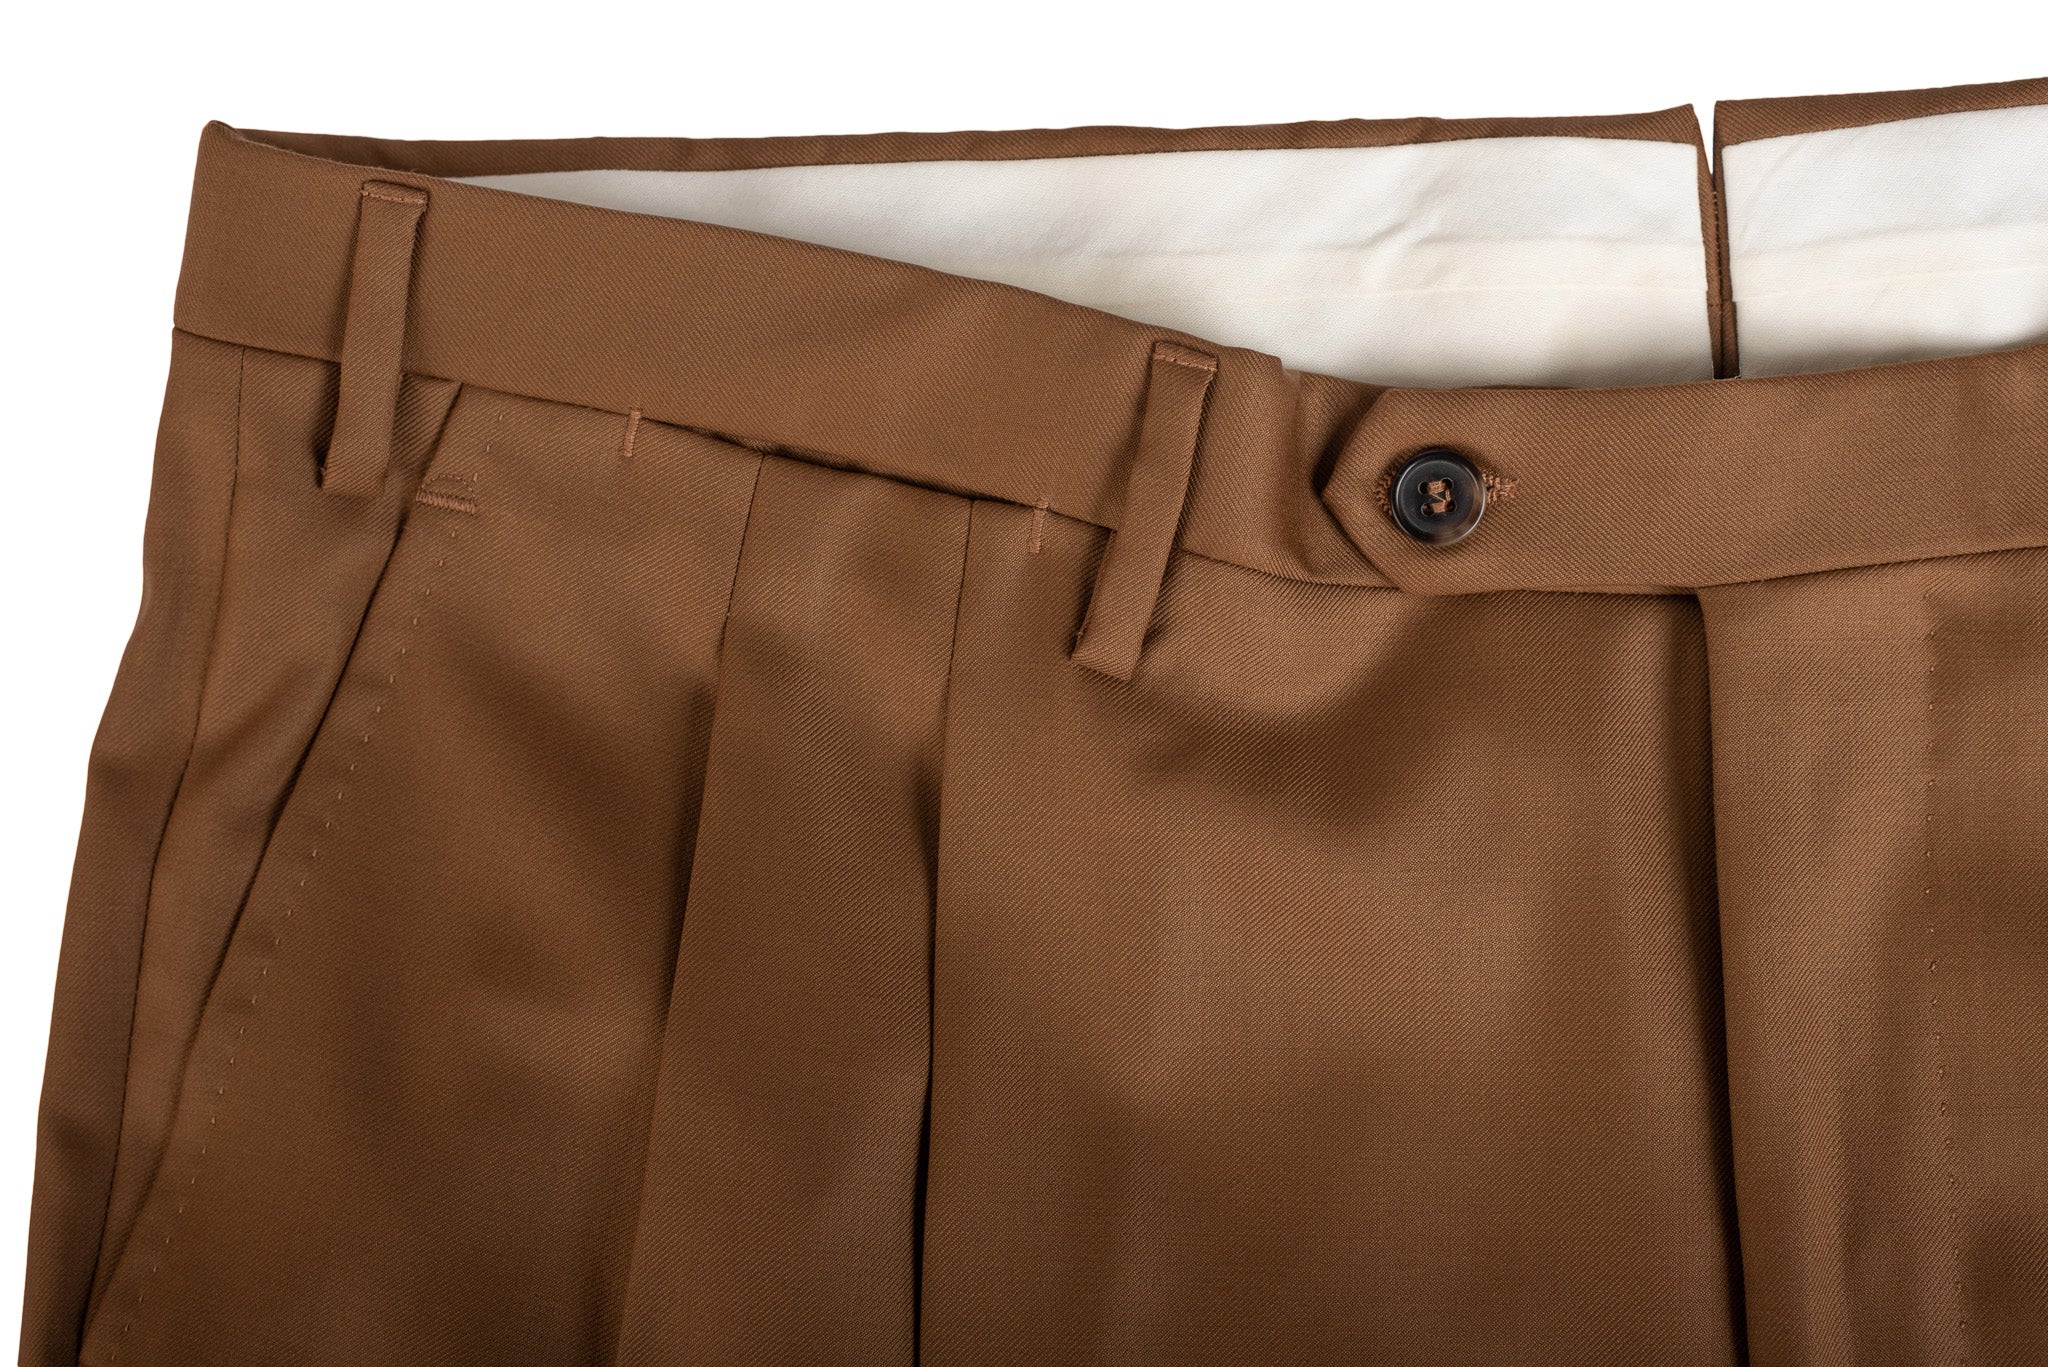 D'AVENZA Roma Brown Wool Twill DP Dress Pants NEW Classic Fit D'AVENZA